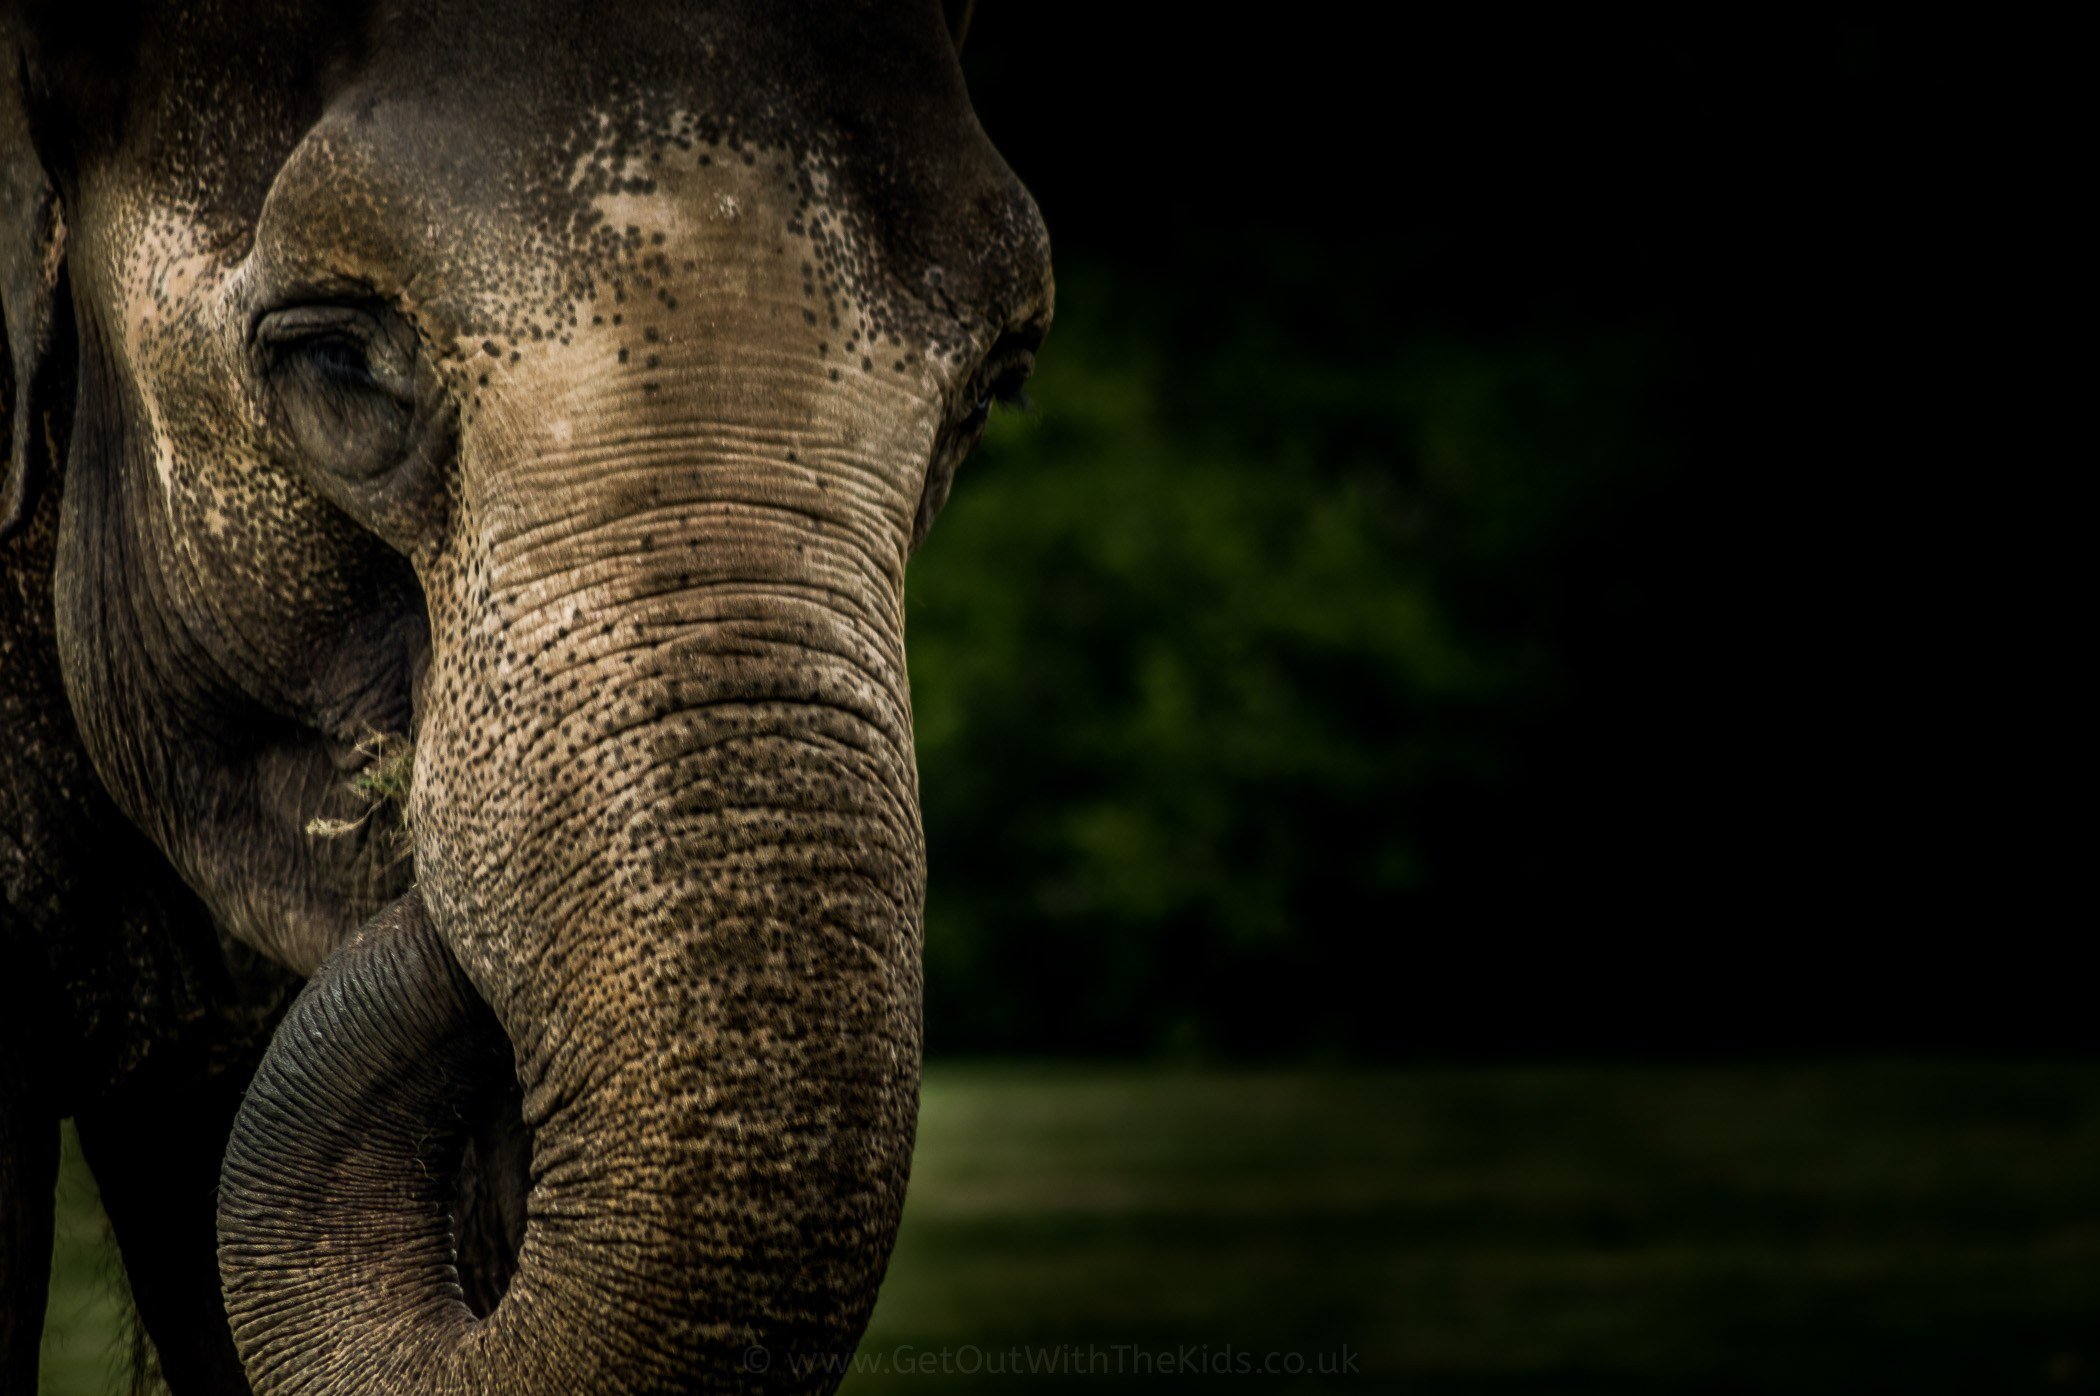 Up close with an elephant at Woburn